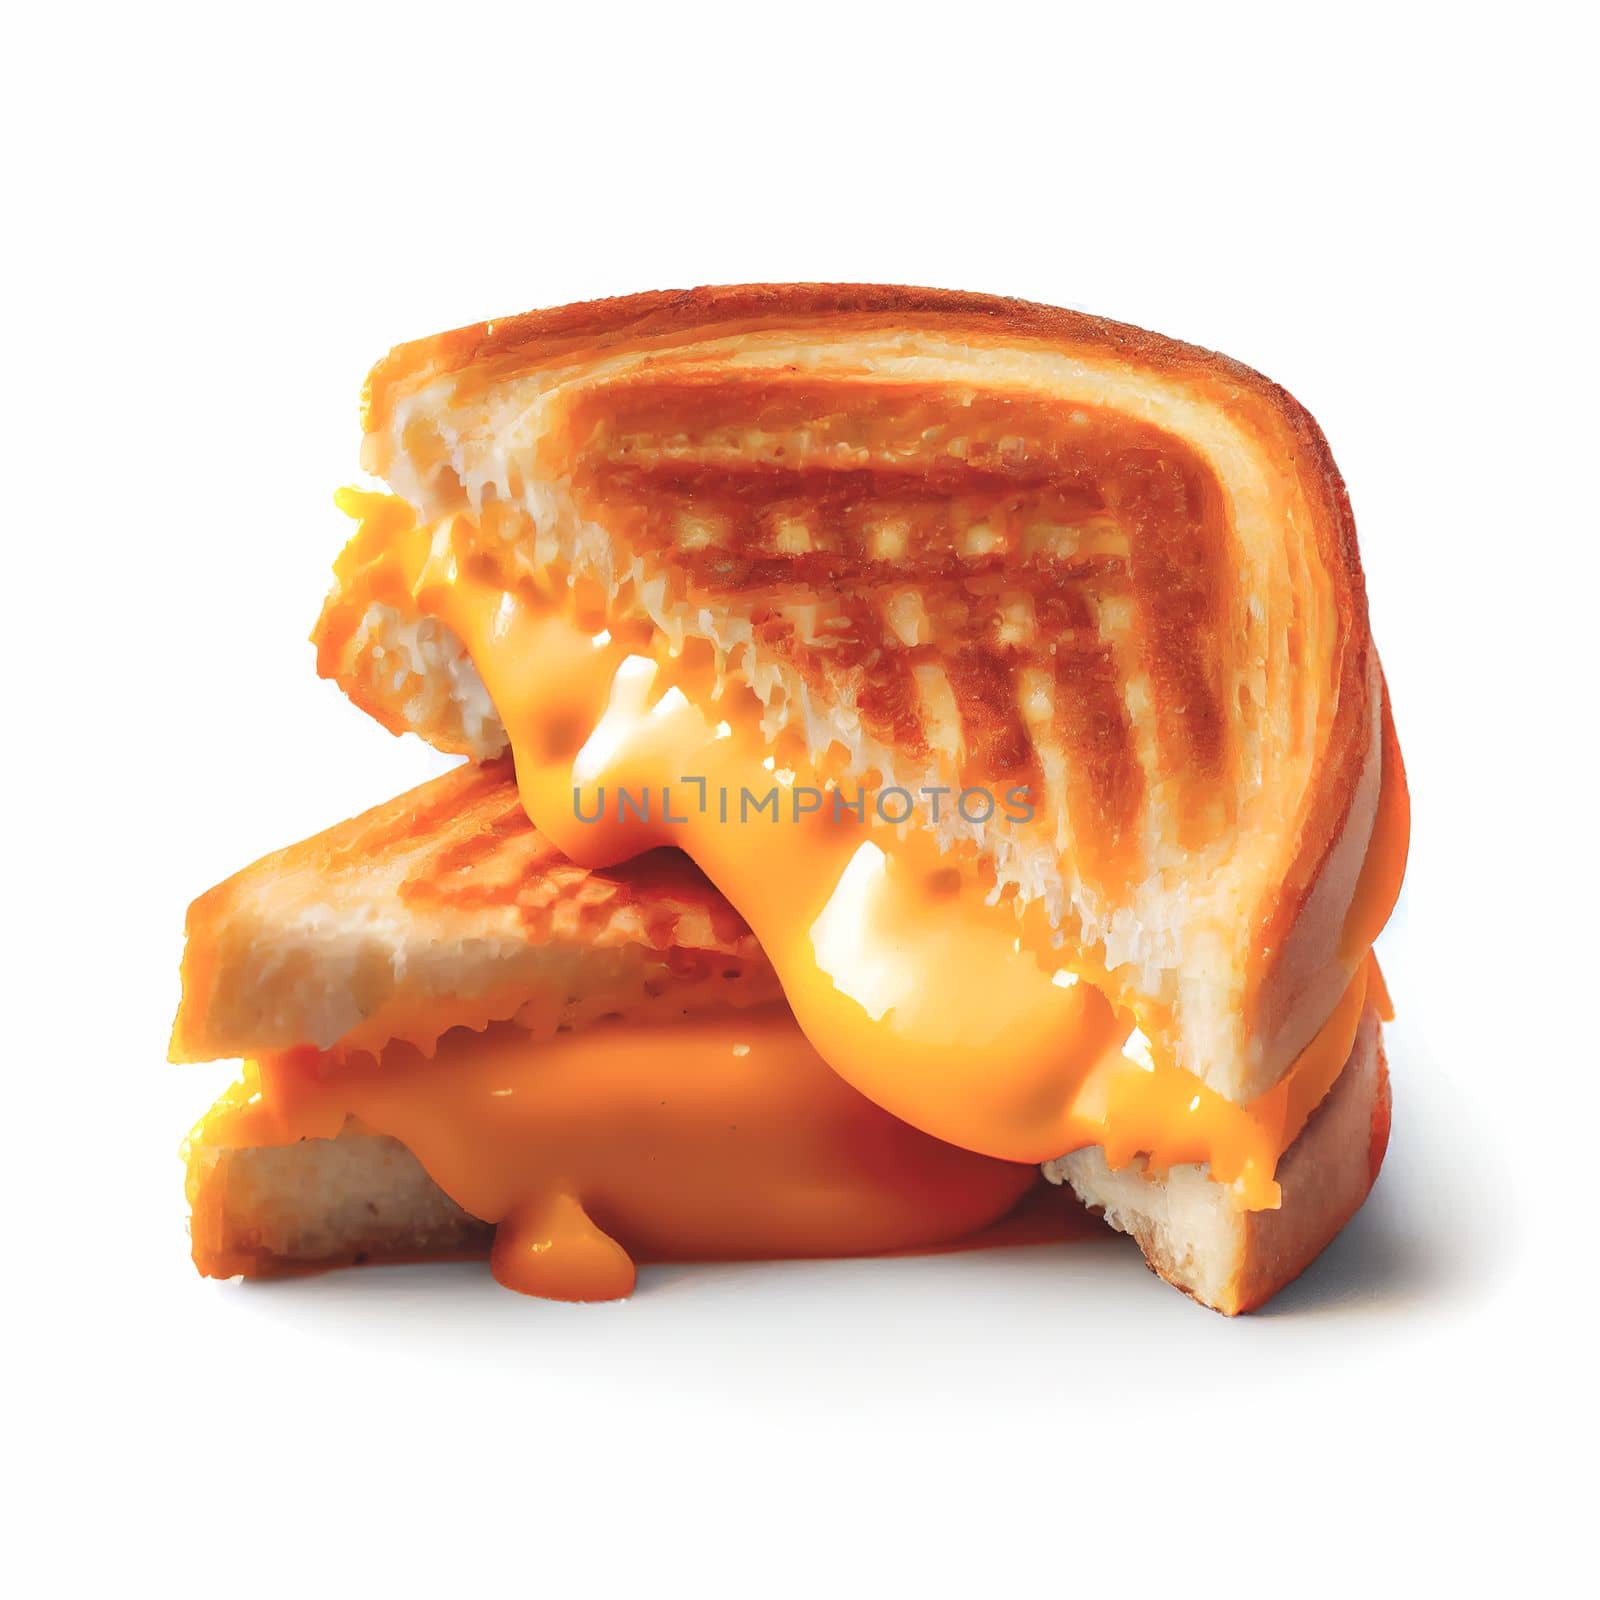 Close up shot of top view grilled cheese sandwich isolated on white background. American dishes collection of recipes popular in USA. These comfort foods are popular at picnics, barbecues, and sporting events.